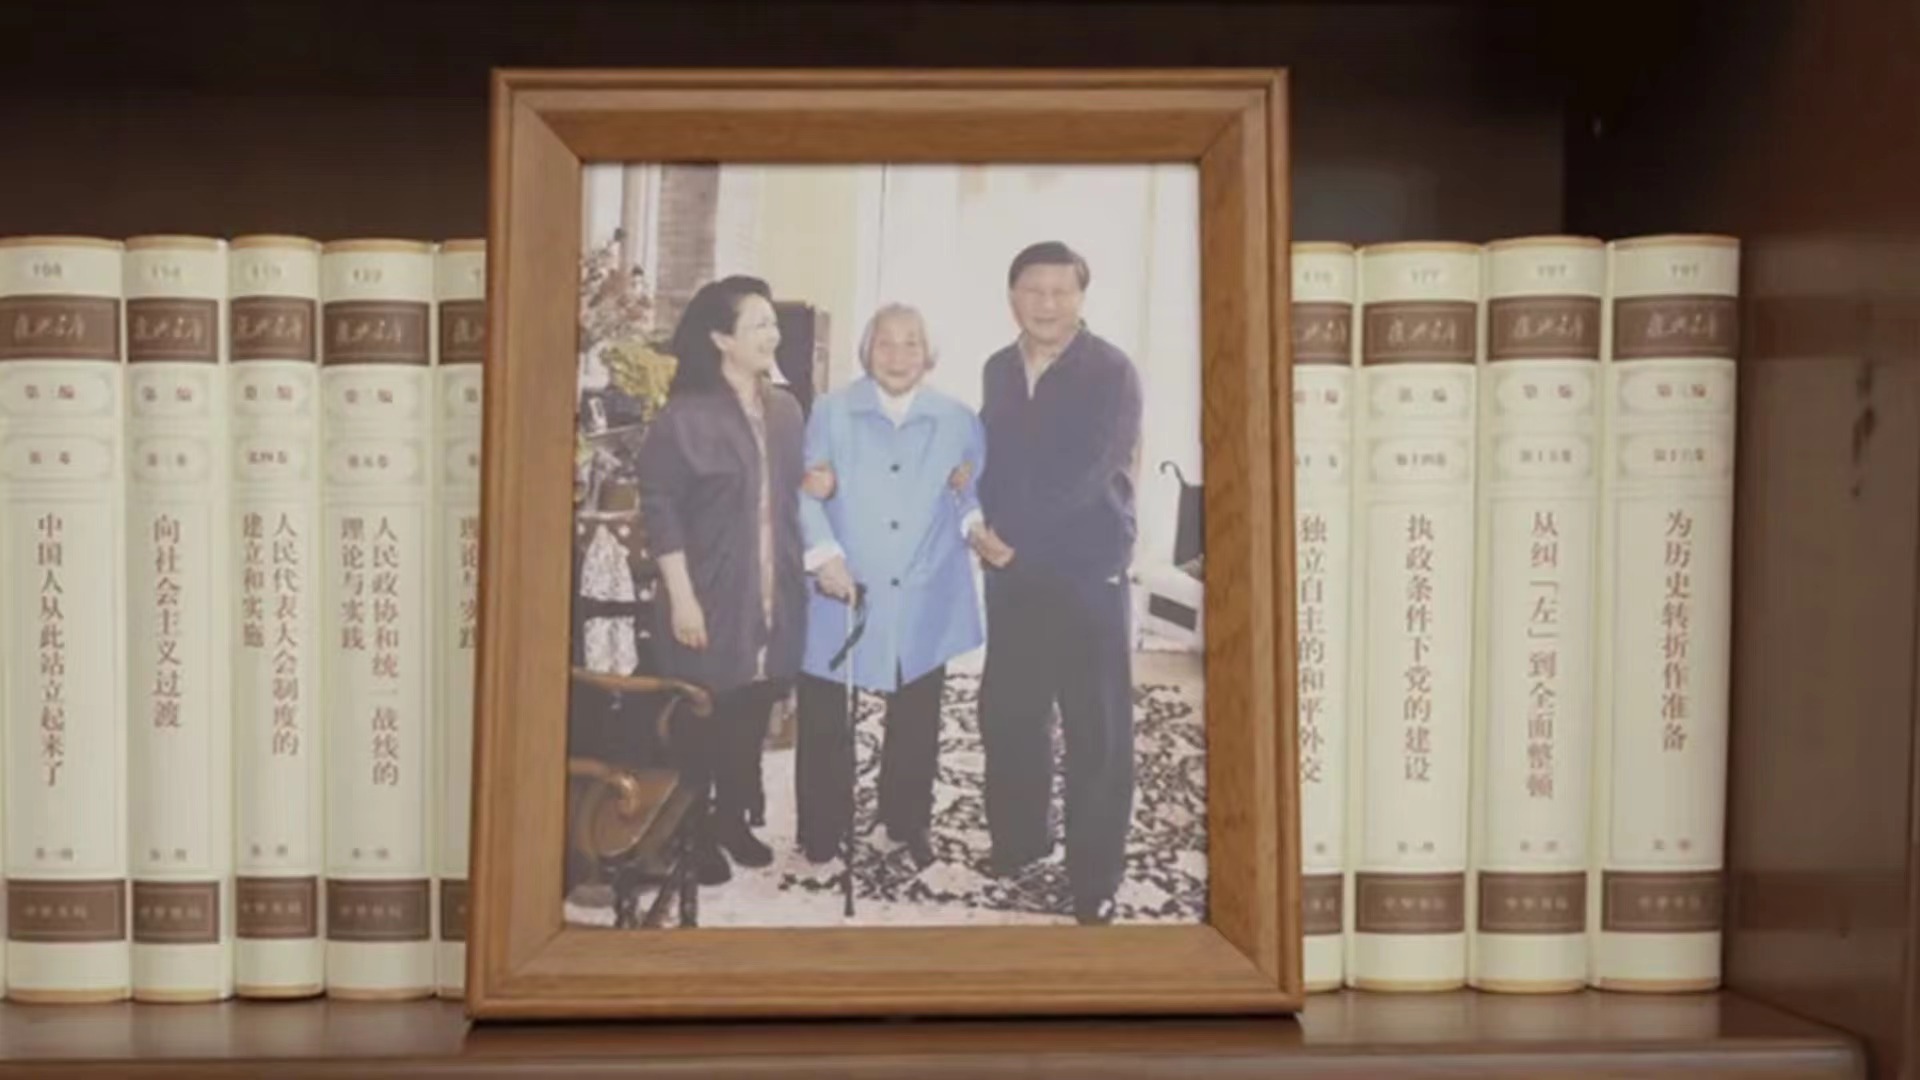 Integrity and thrift: Uncovering Xi Jinping's family traditions